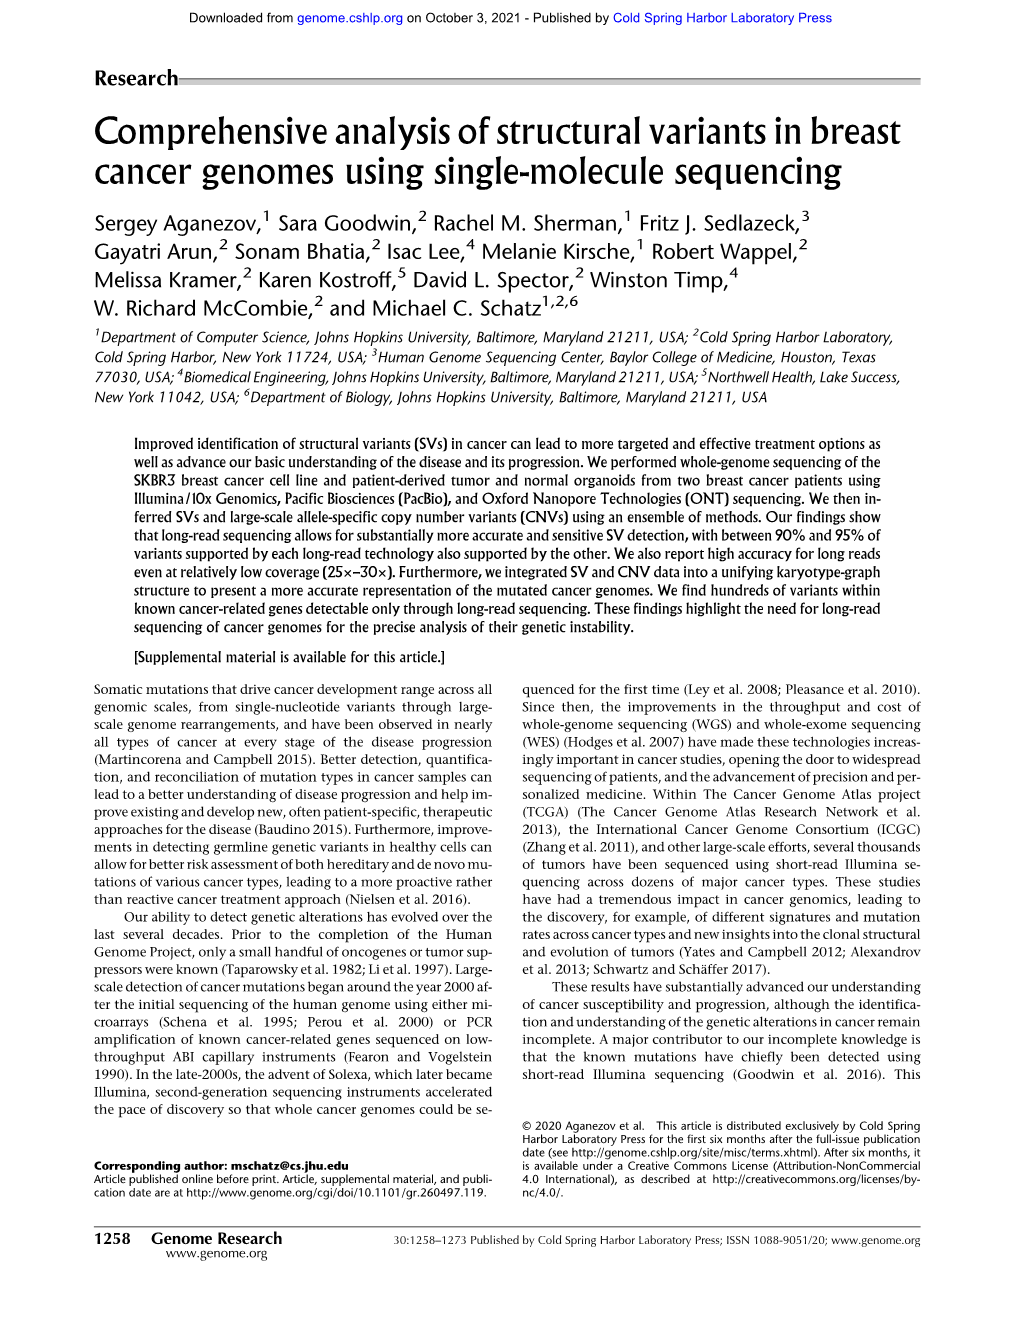 Comprehensive Analysis of Structural Variants in Breast Cancer Genomes Using Single-Molecule Sequencing